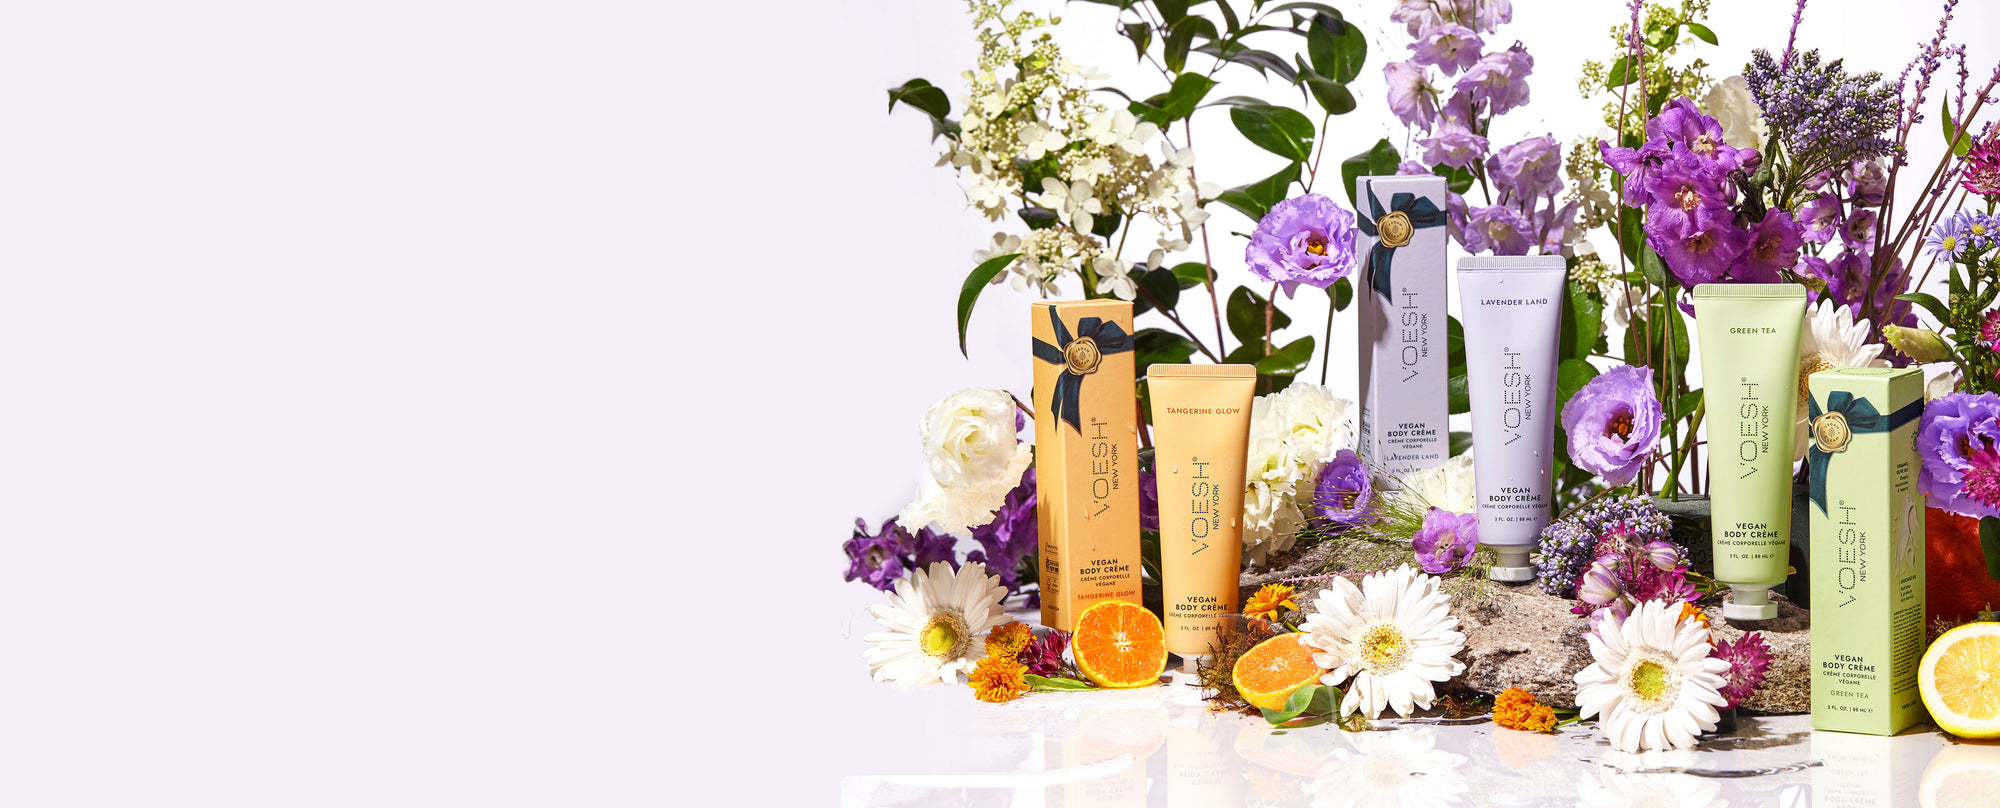 Vegan Body Crème Trio on a light purple background with colorful flowers and orange and lemon slices.